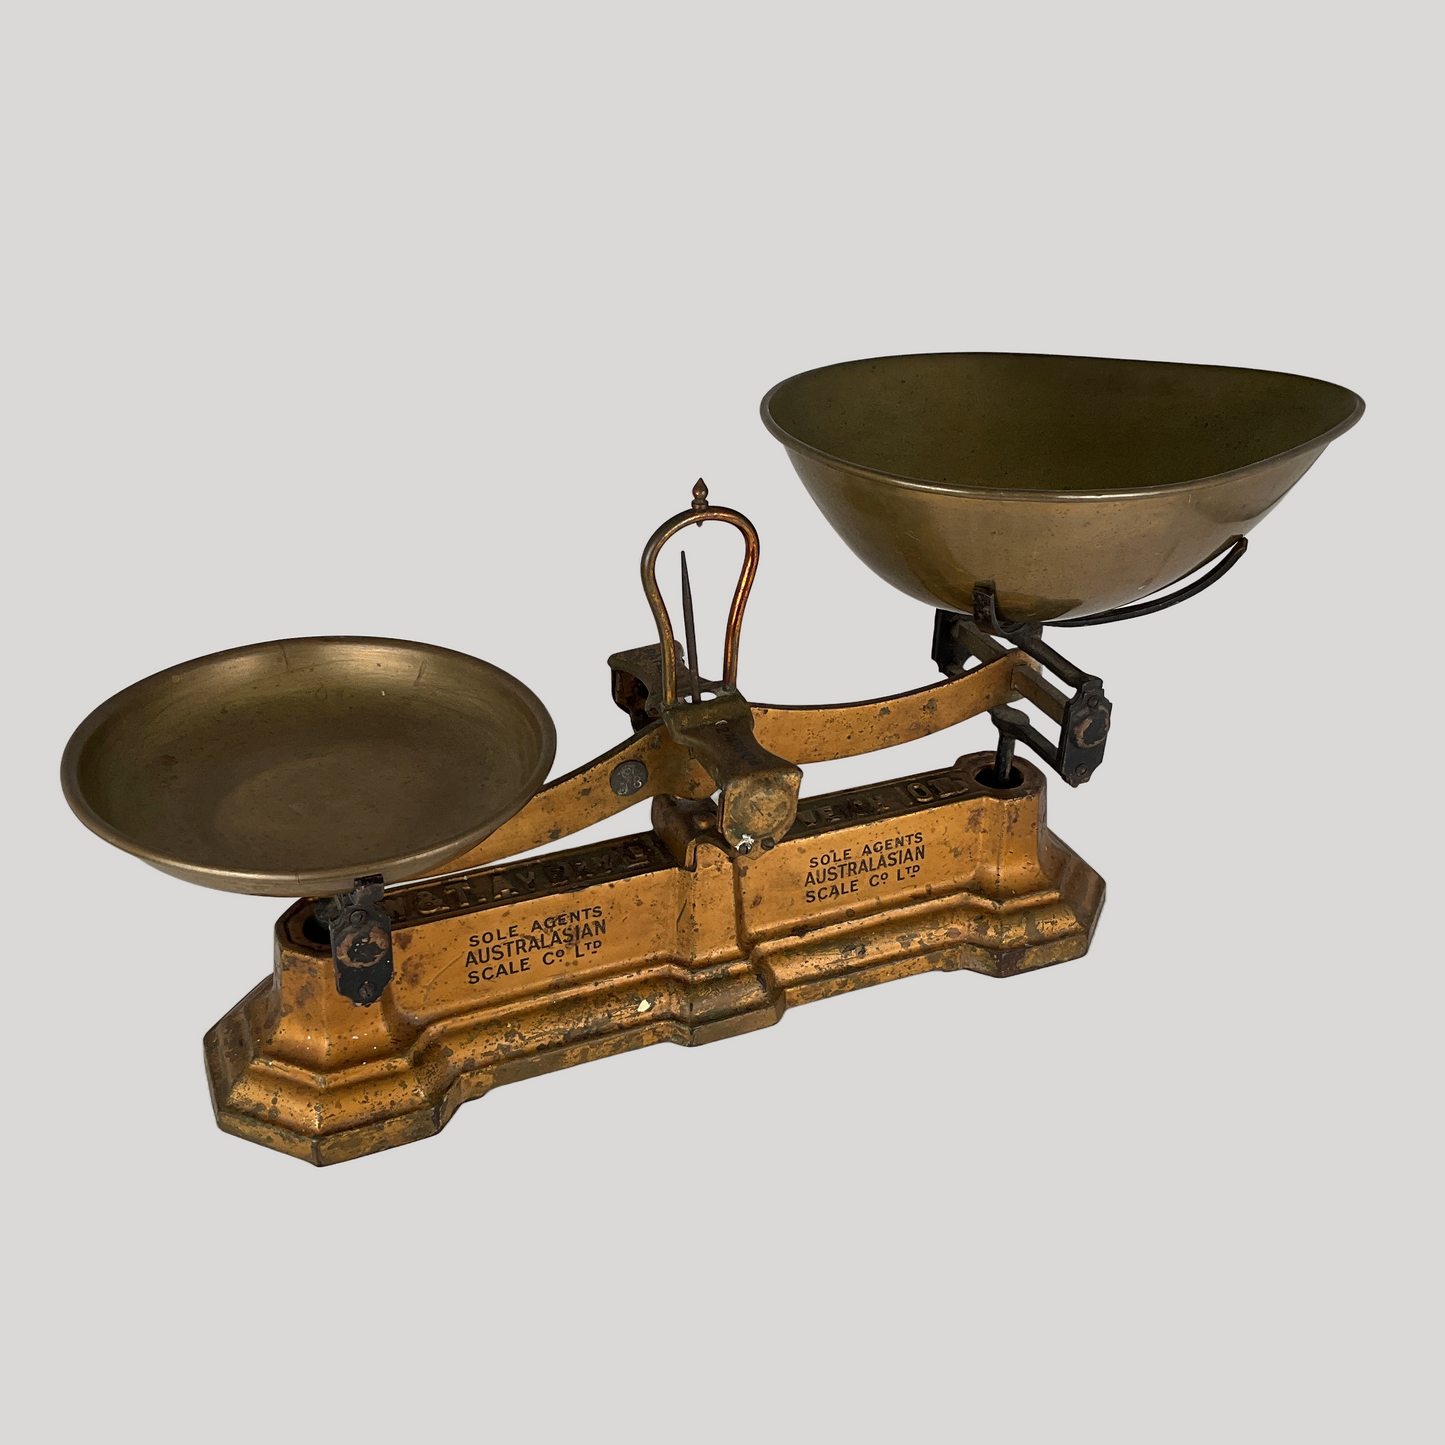 W & T Avery Ltd - Vintage Weigh Scales